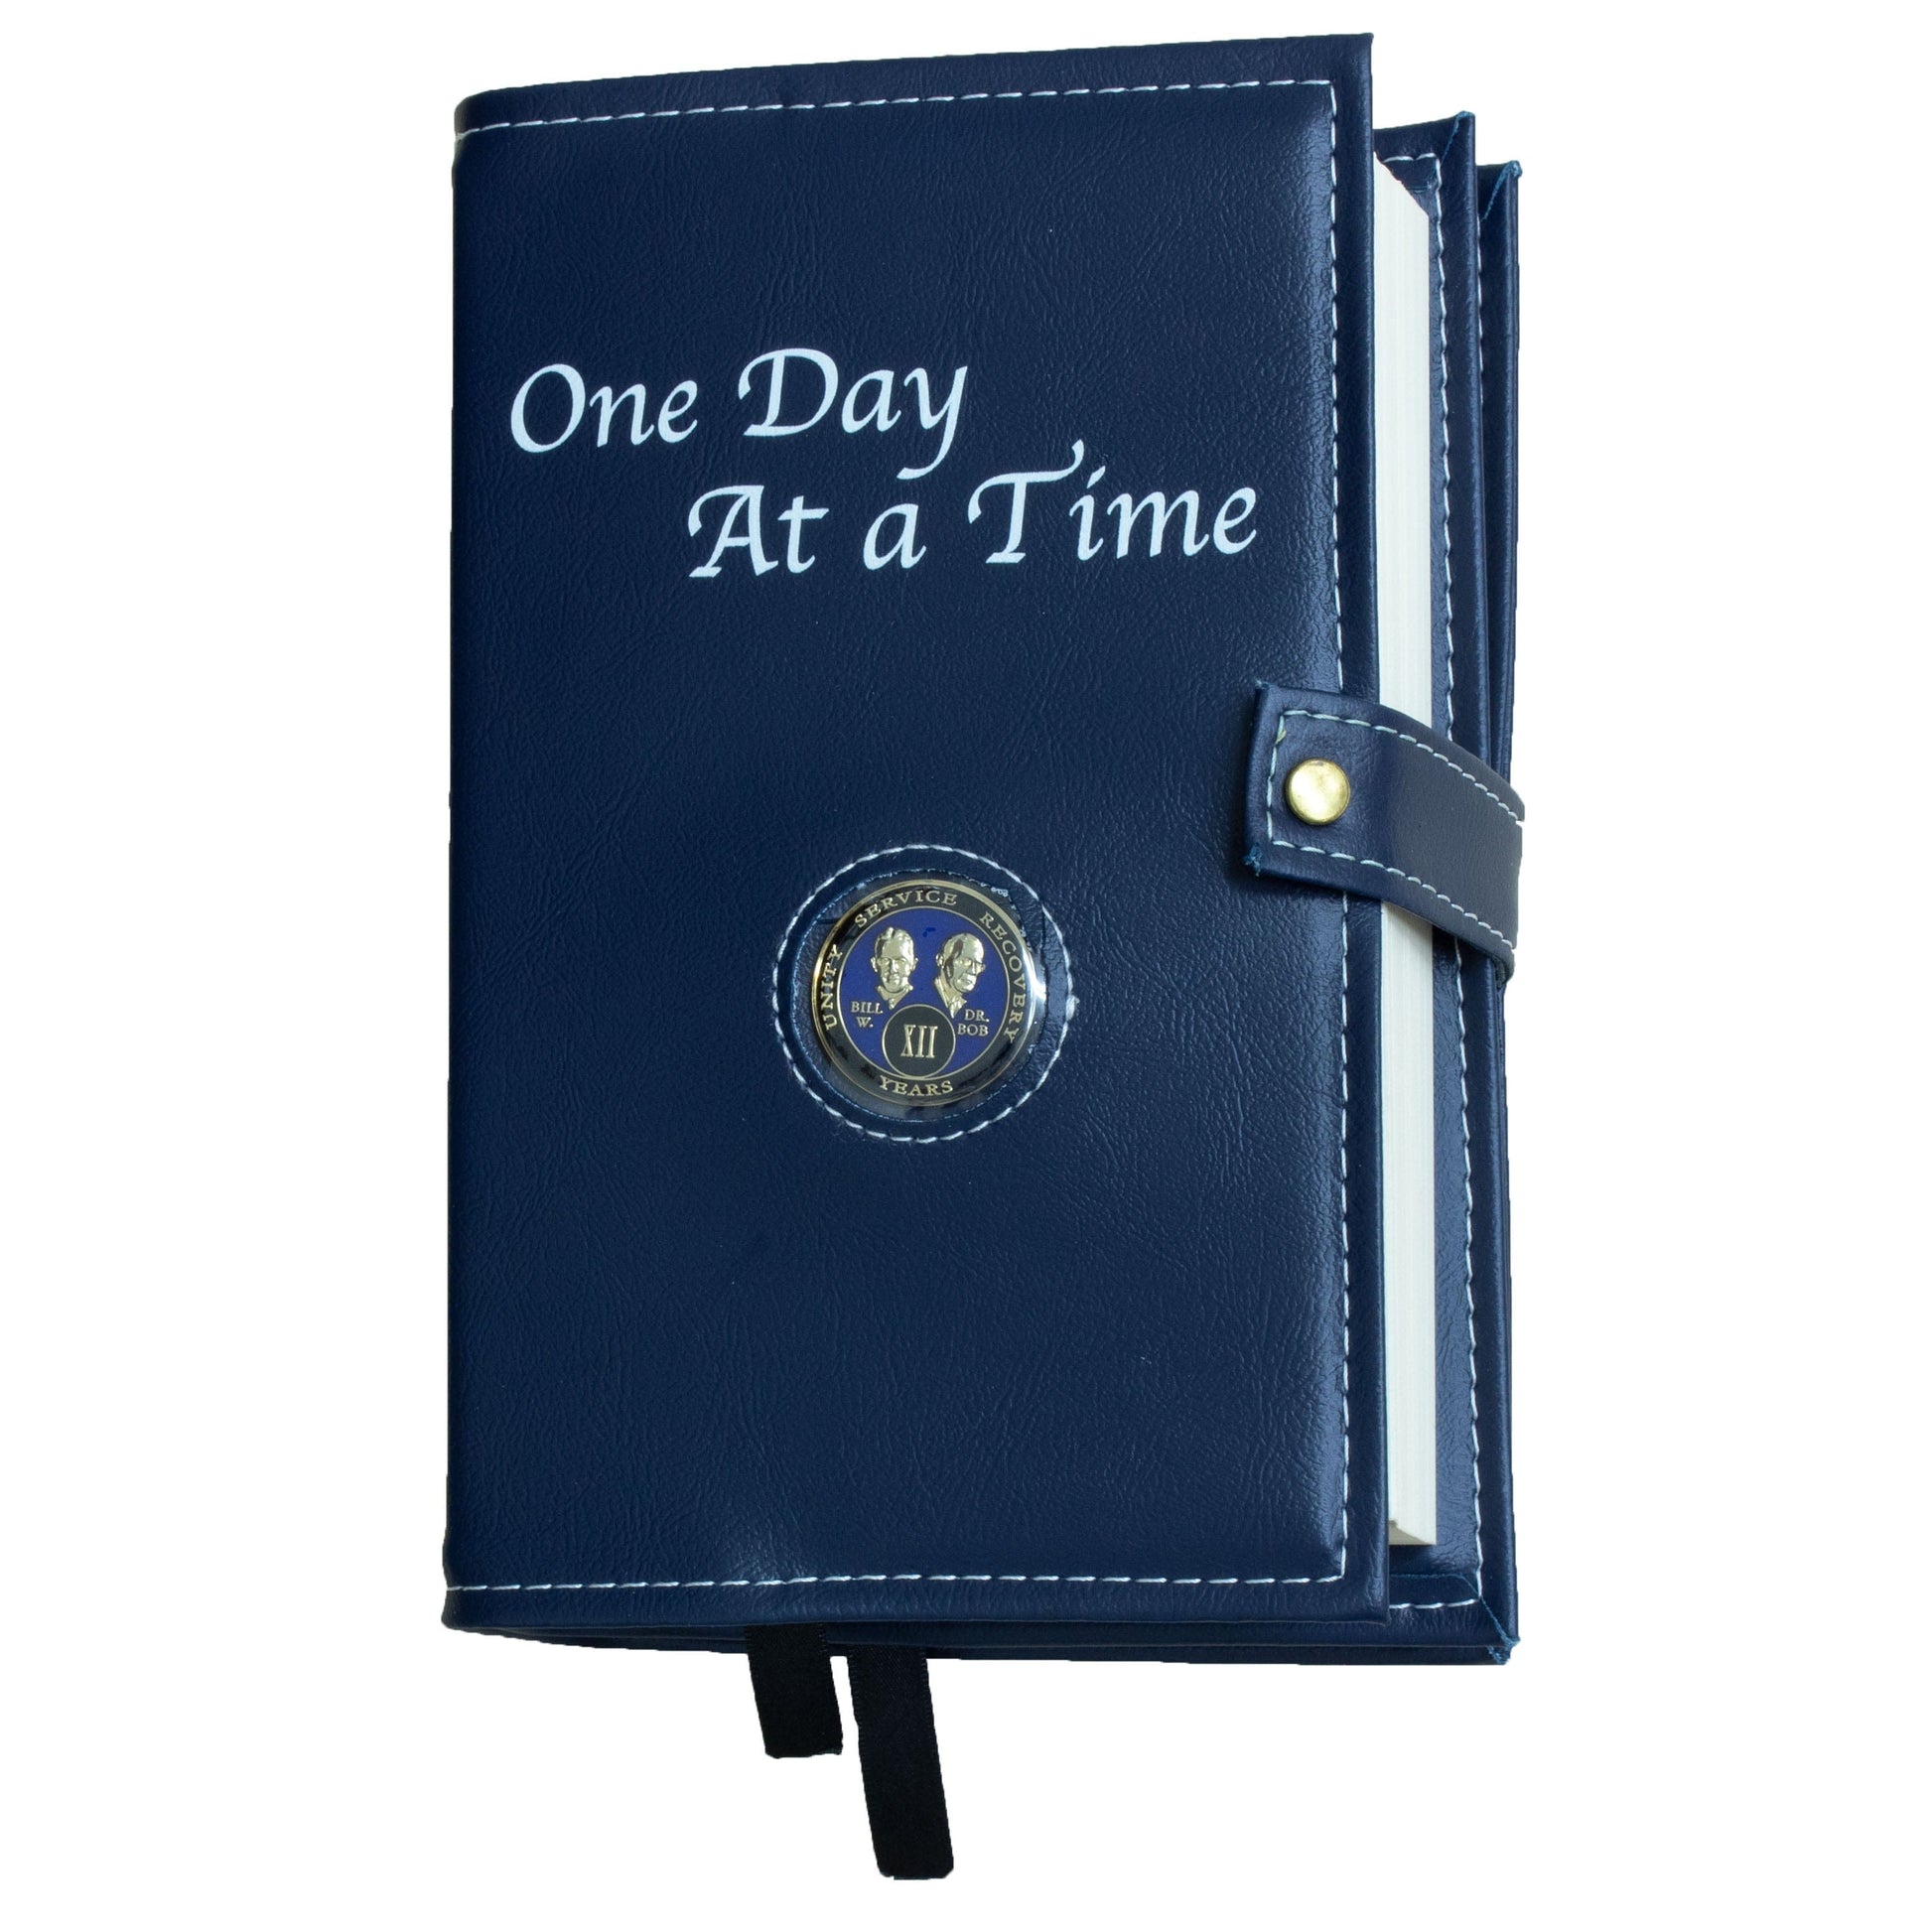 One Day At A Time Navy Blue Book Cover With Sobriety Chip Holder